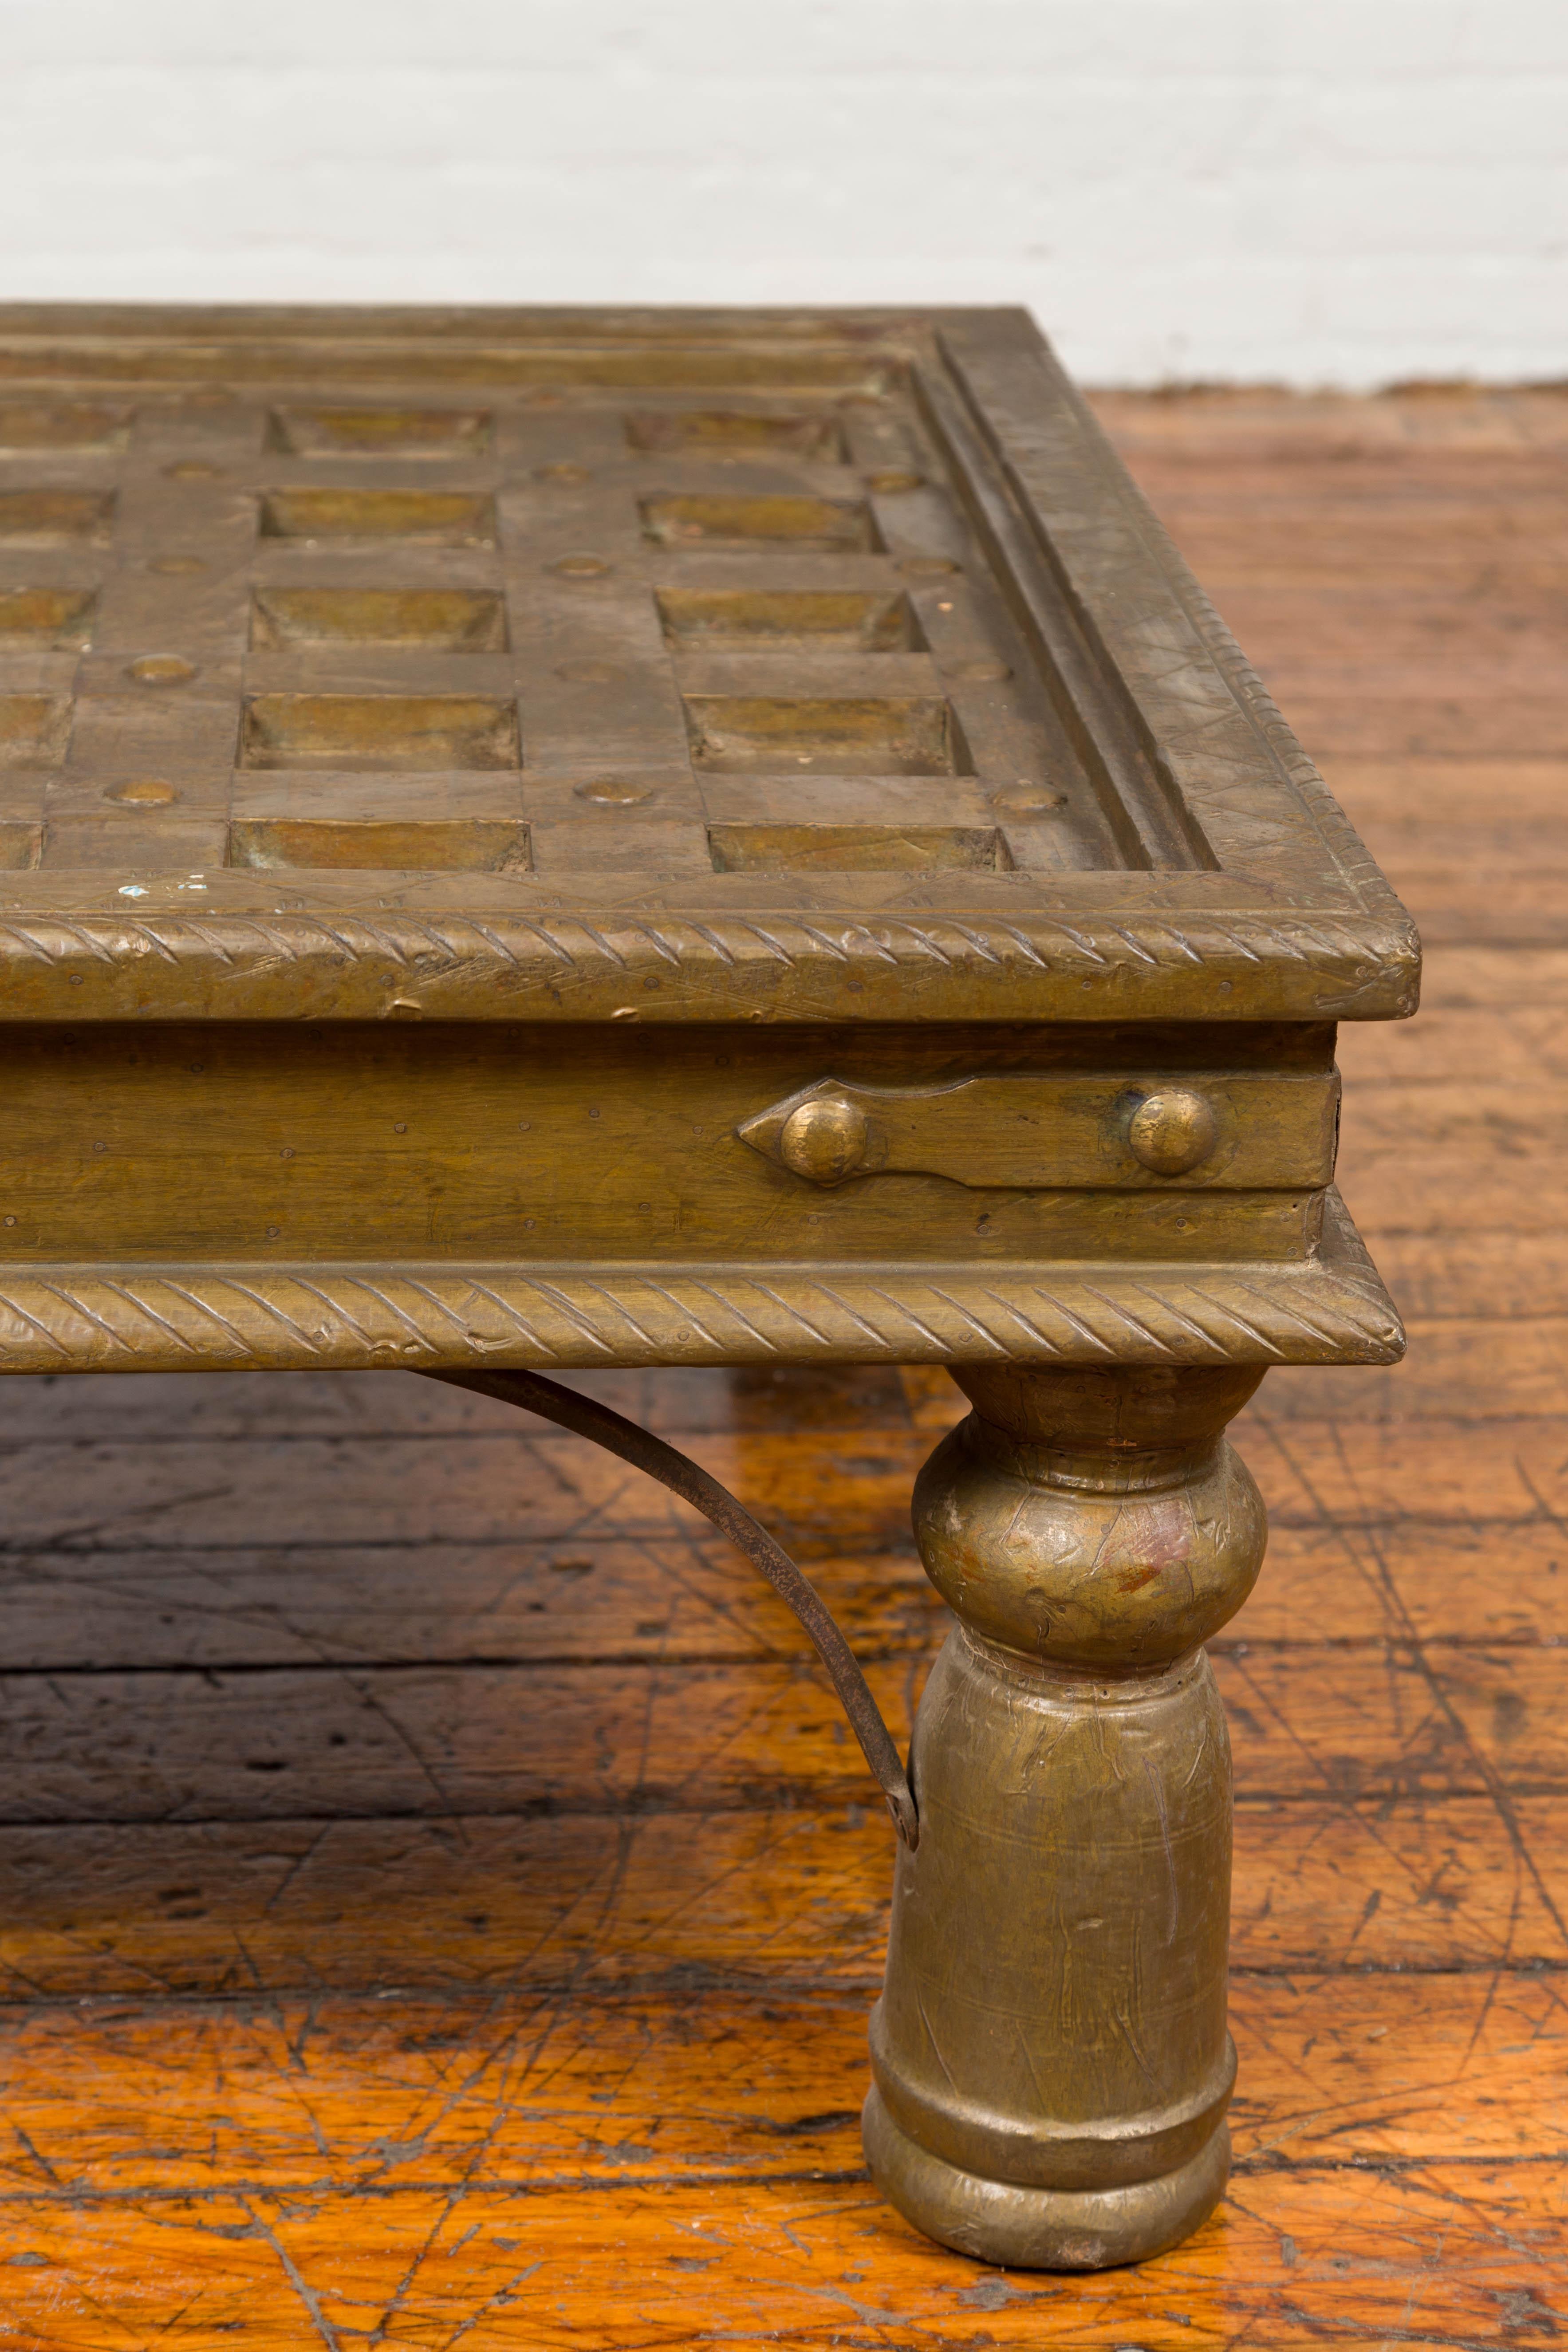 19th Century Indian Geometric Top Brass Sheathing Window Grate Made into a Coffee Table For Sale